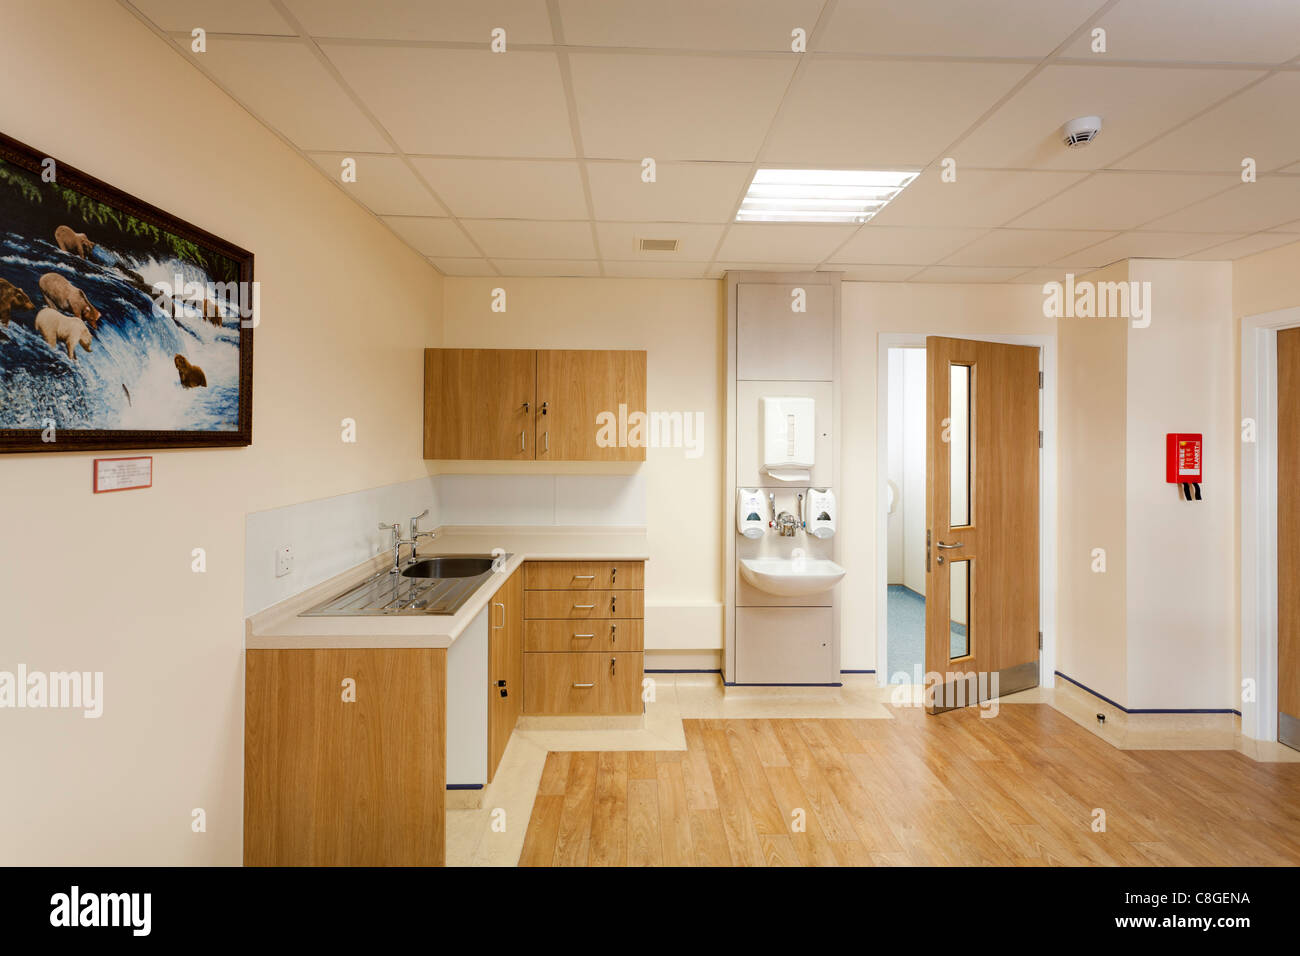 room to recreate the home environment for the rehabilitation of patients at Royal Bournemouth Hospital Stroke Unit Stock Photo